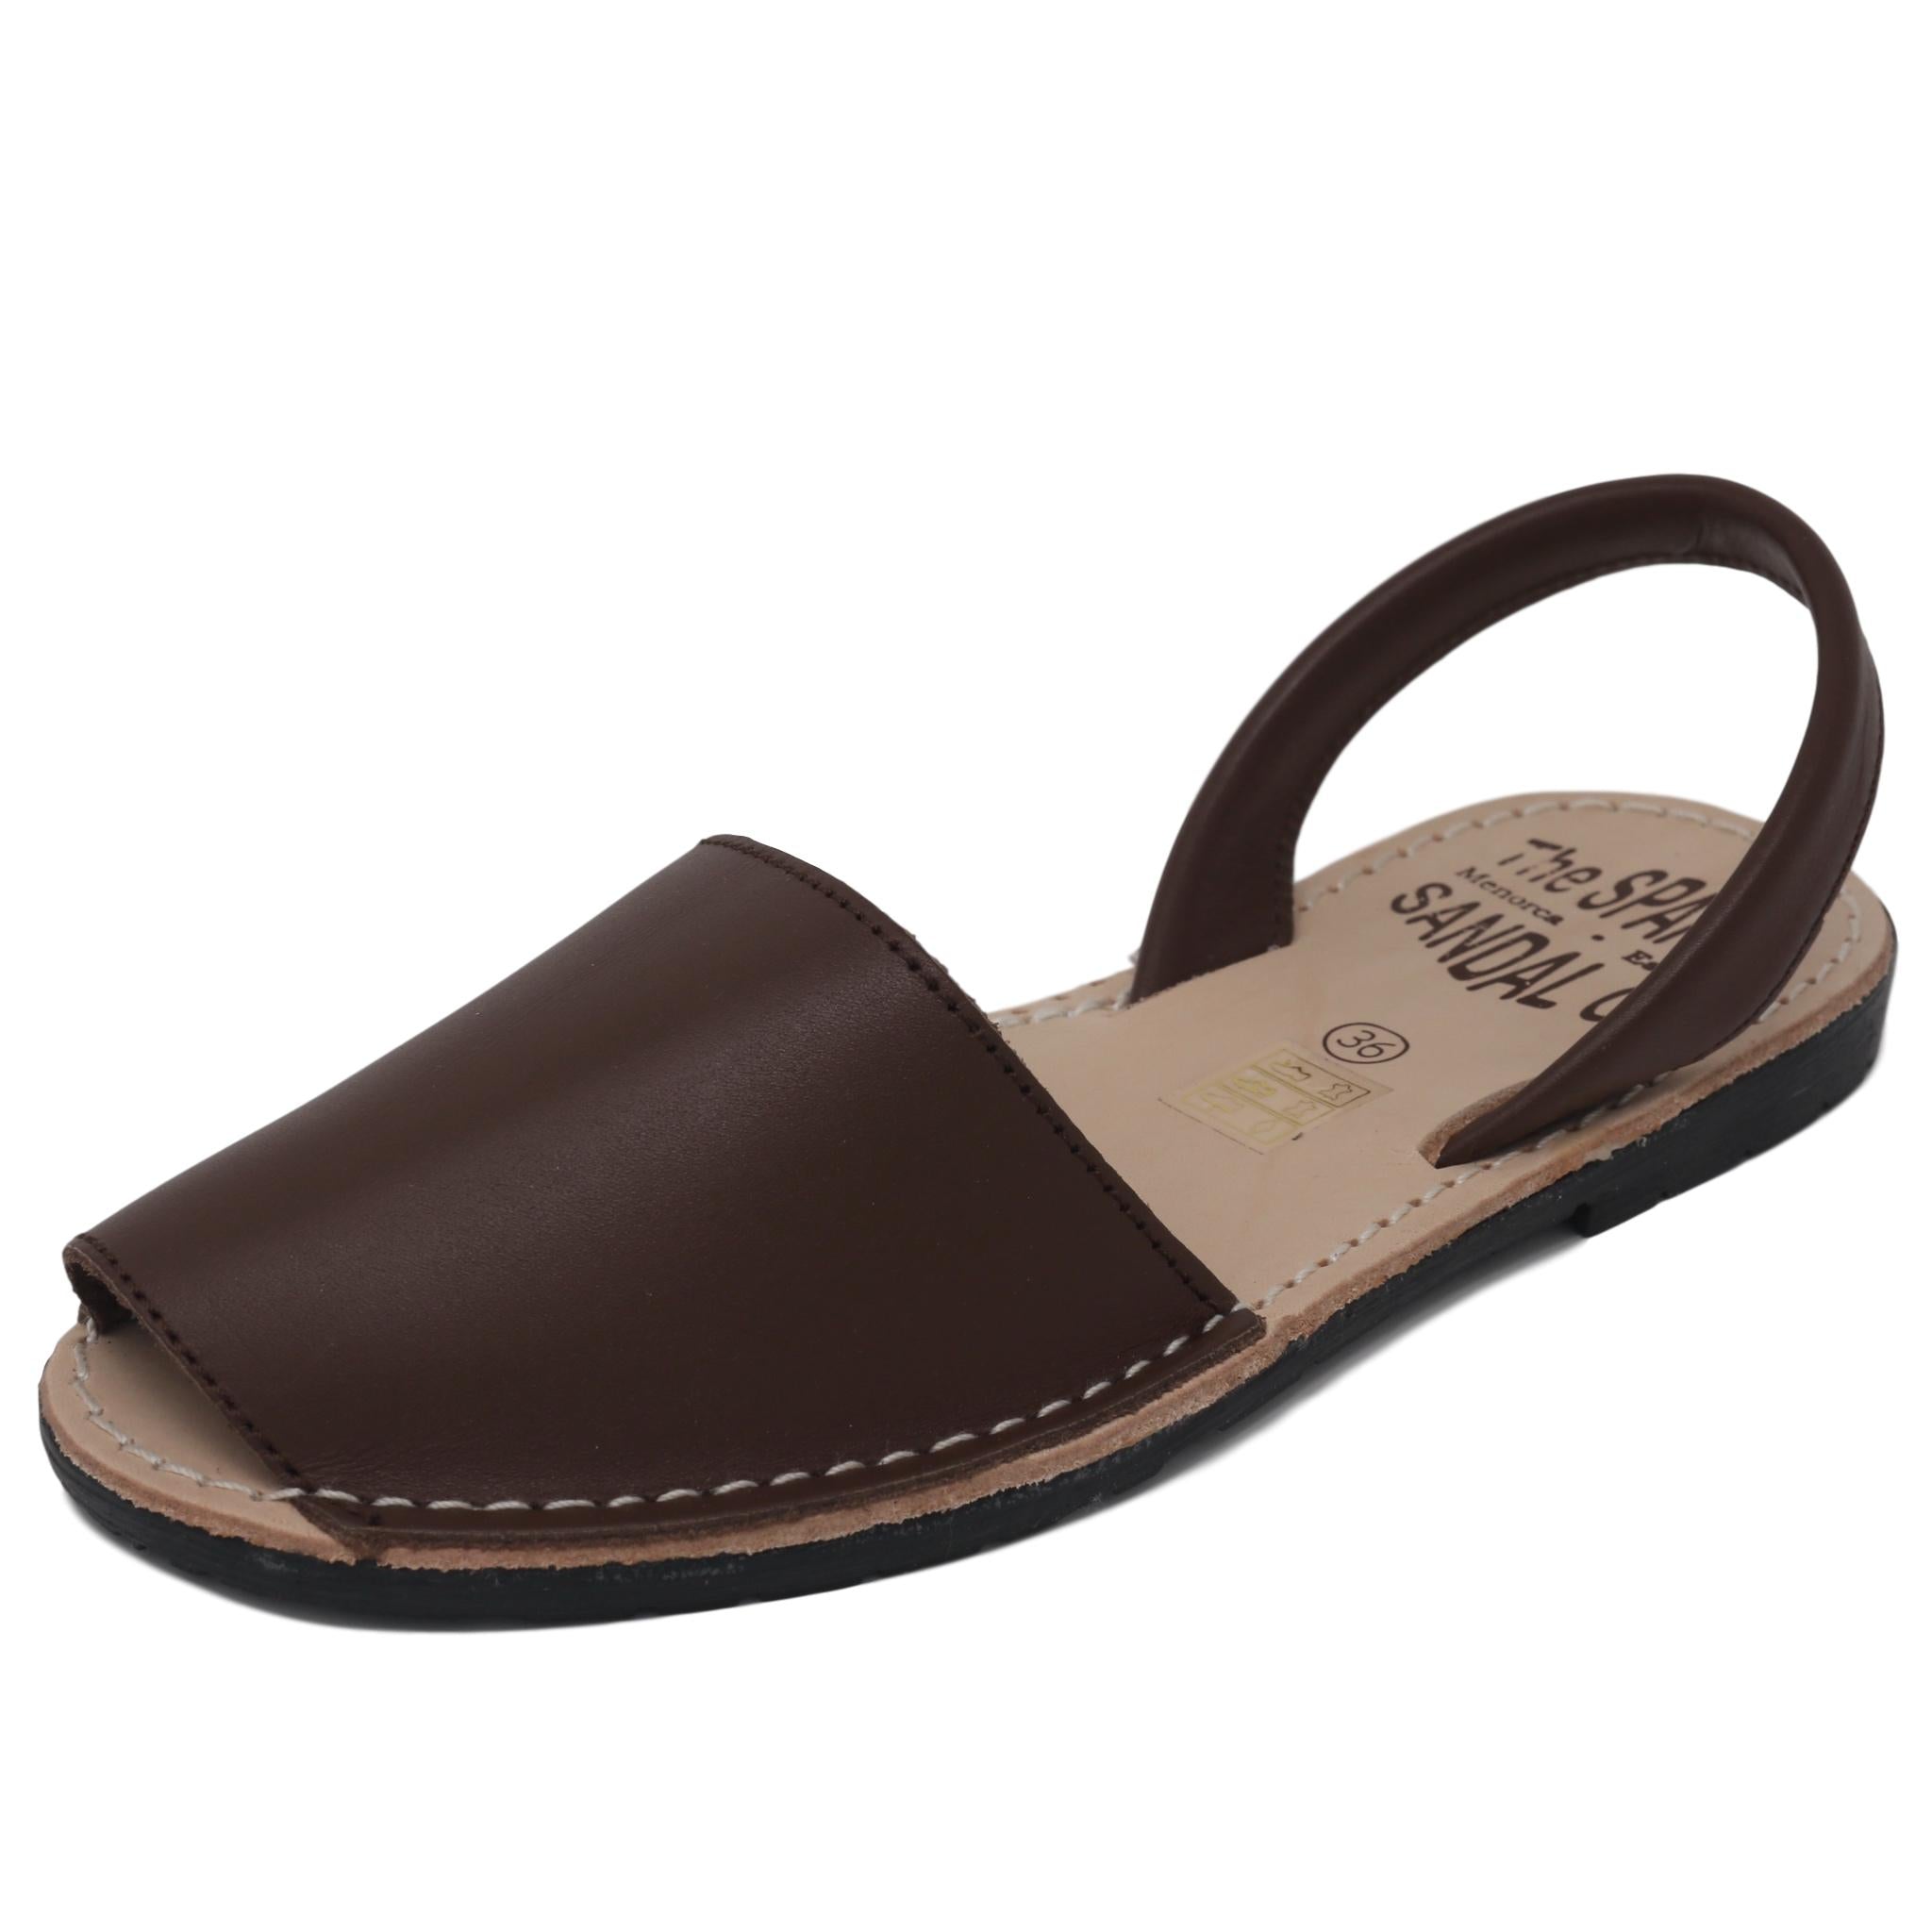 Classic Chocolate brown sandals